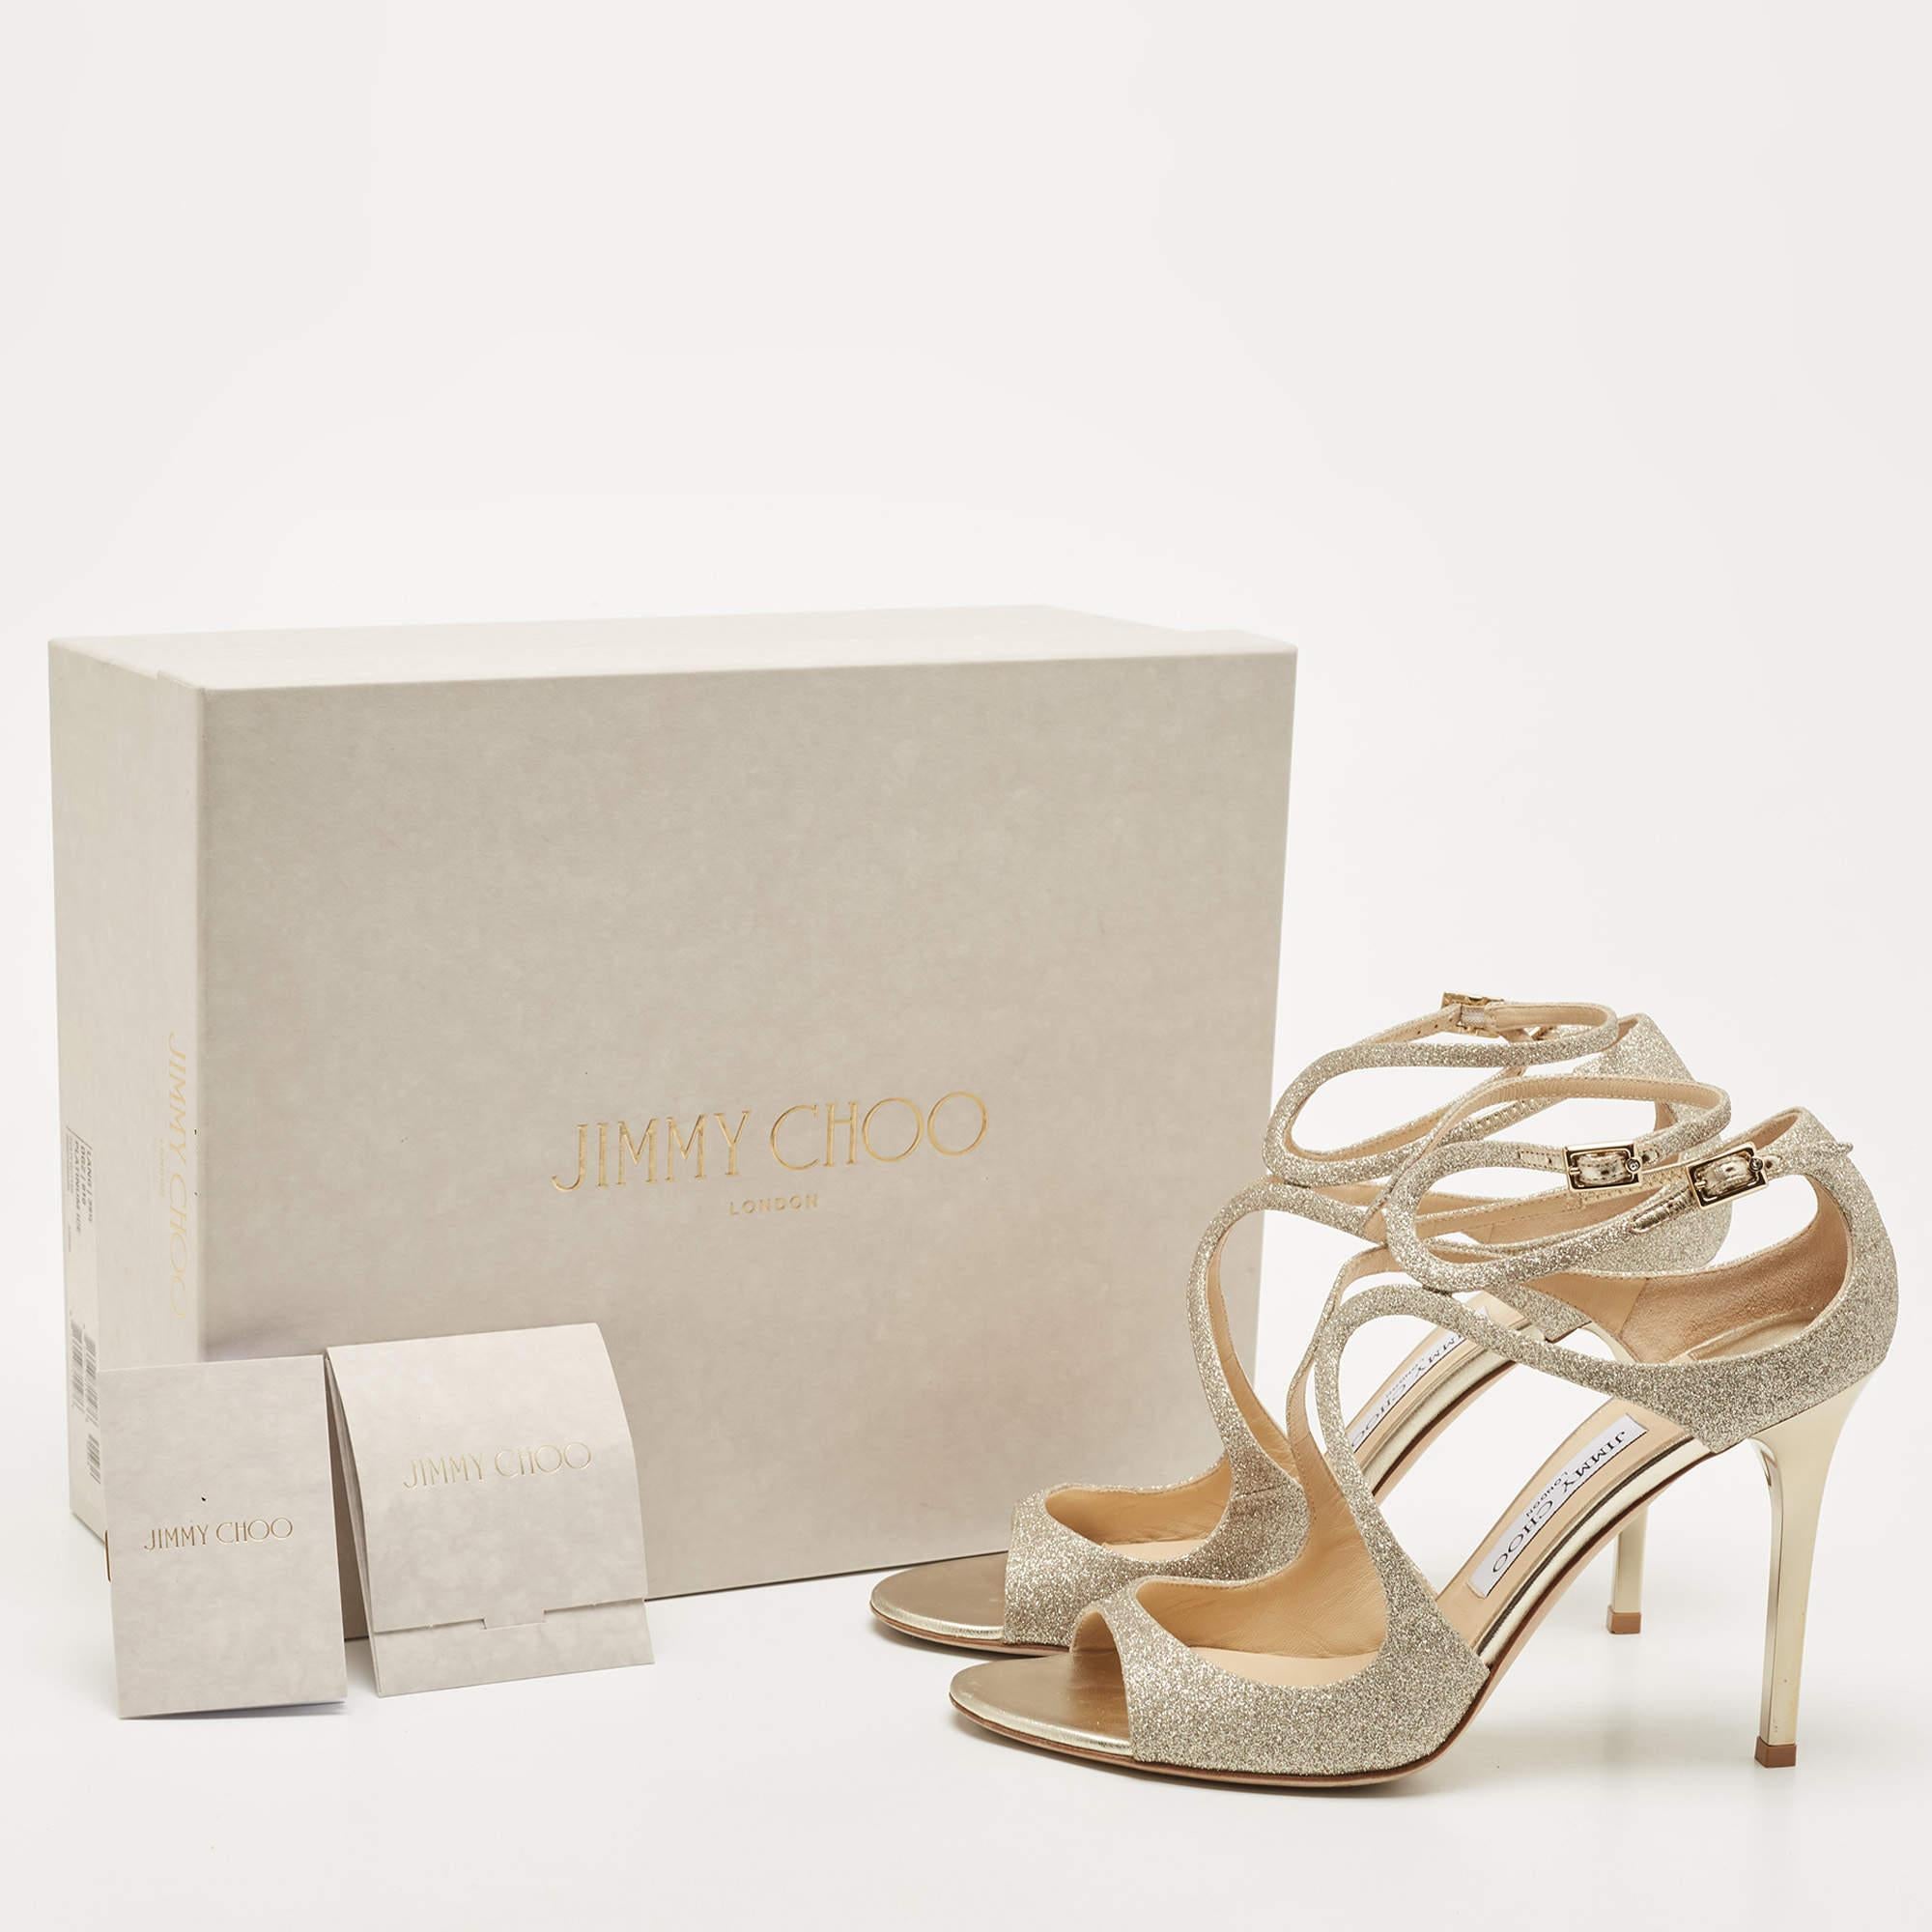 Jimmy Choo Silver Glitter and Leather Lang Sandals Size 39.5 3